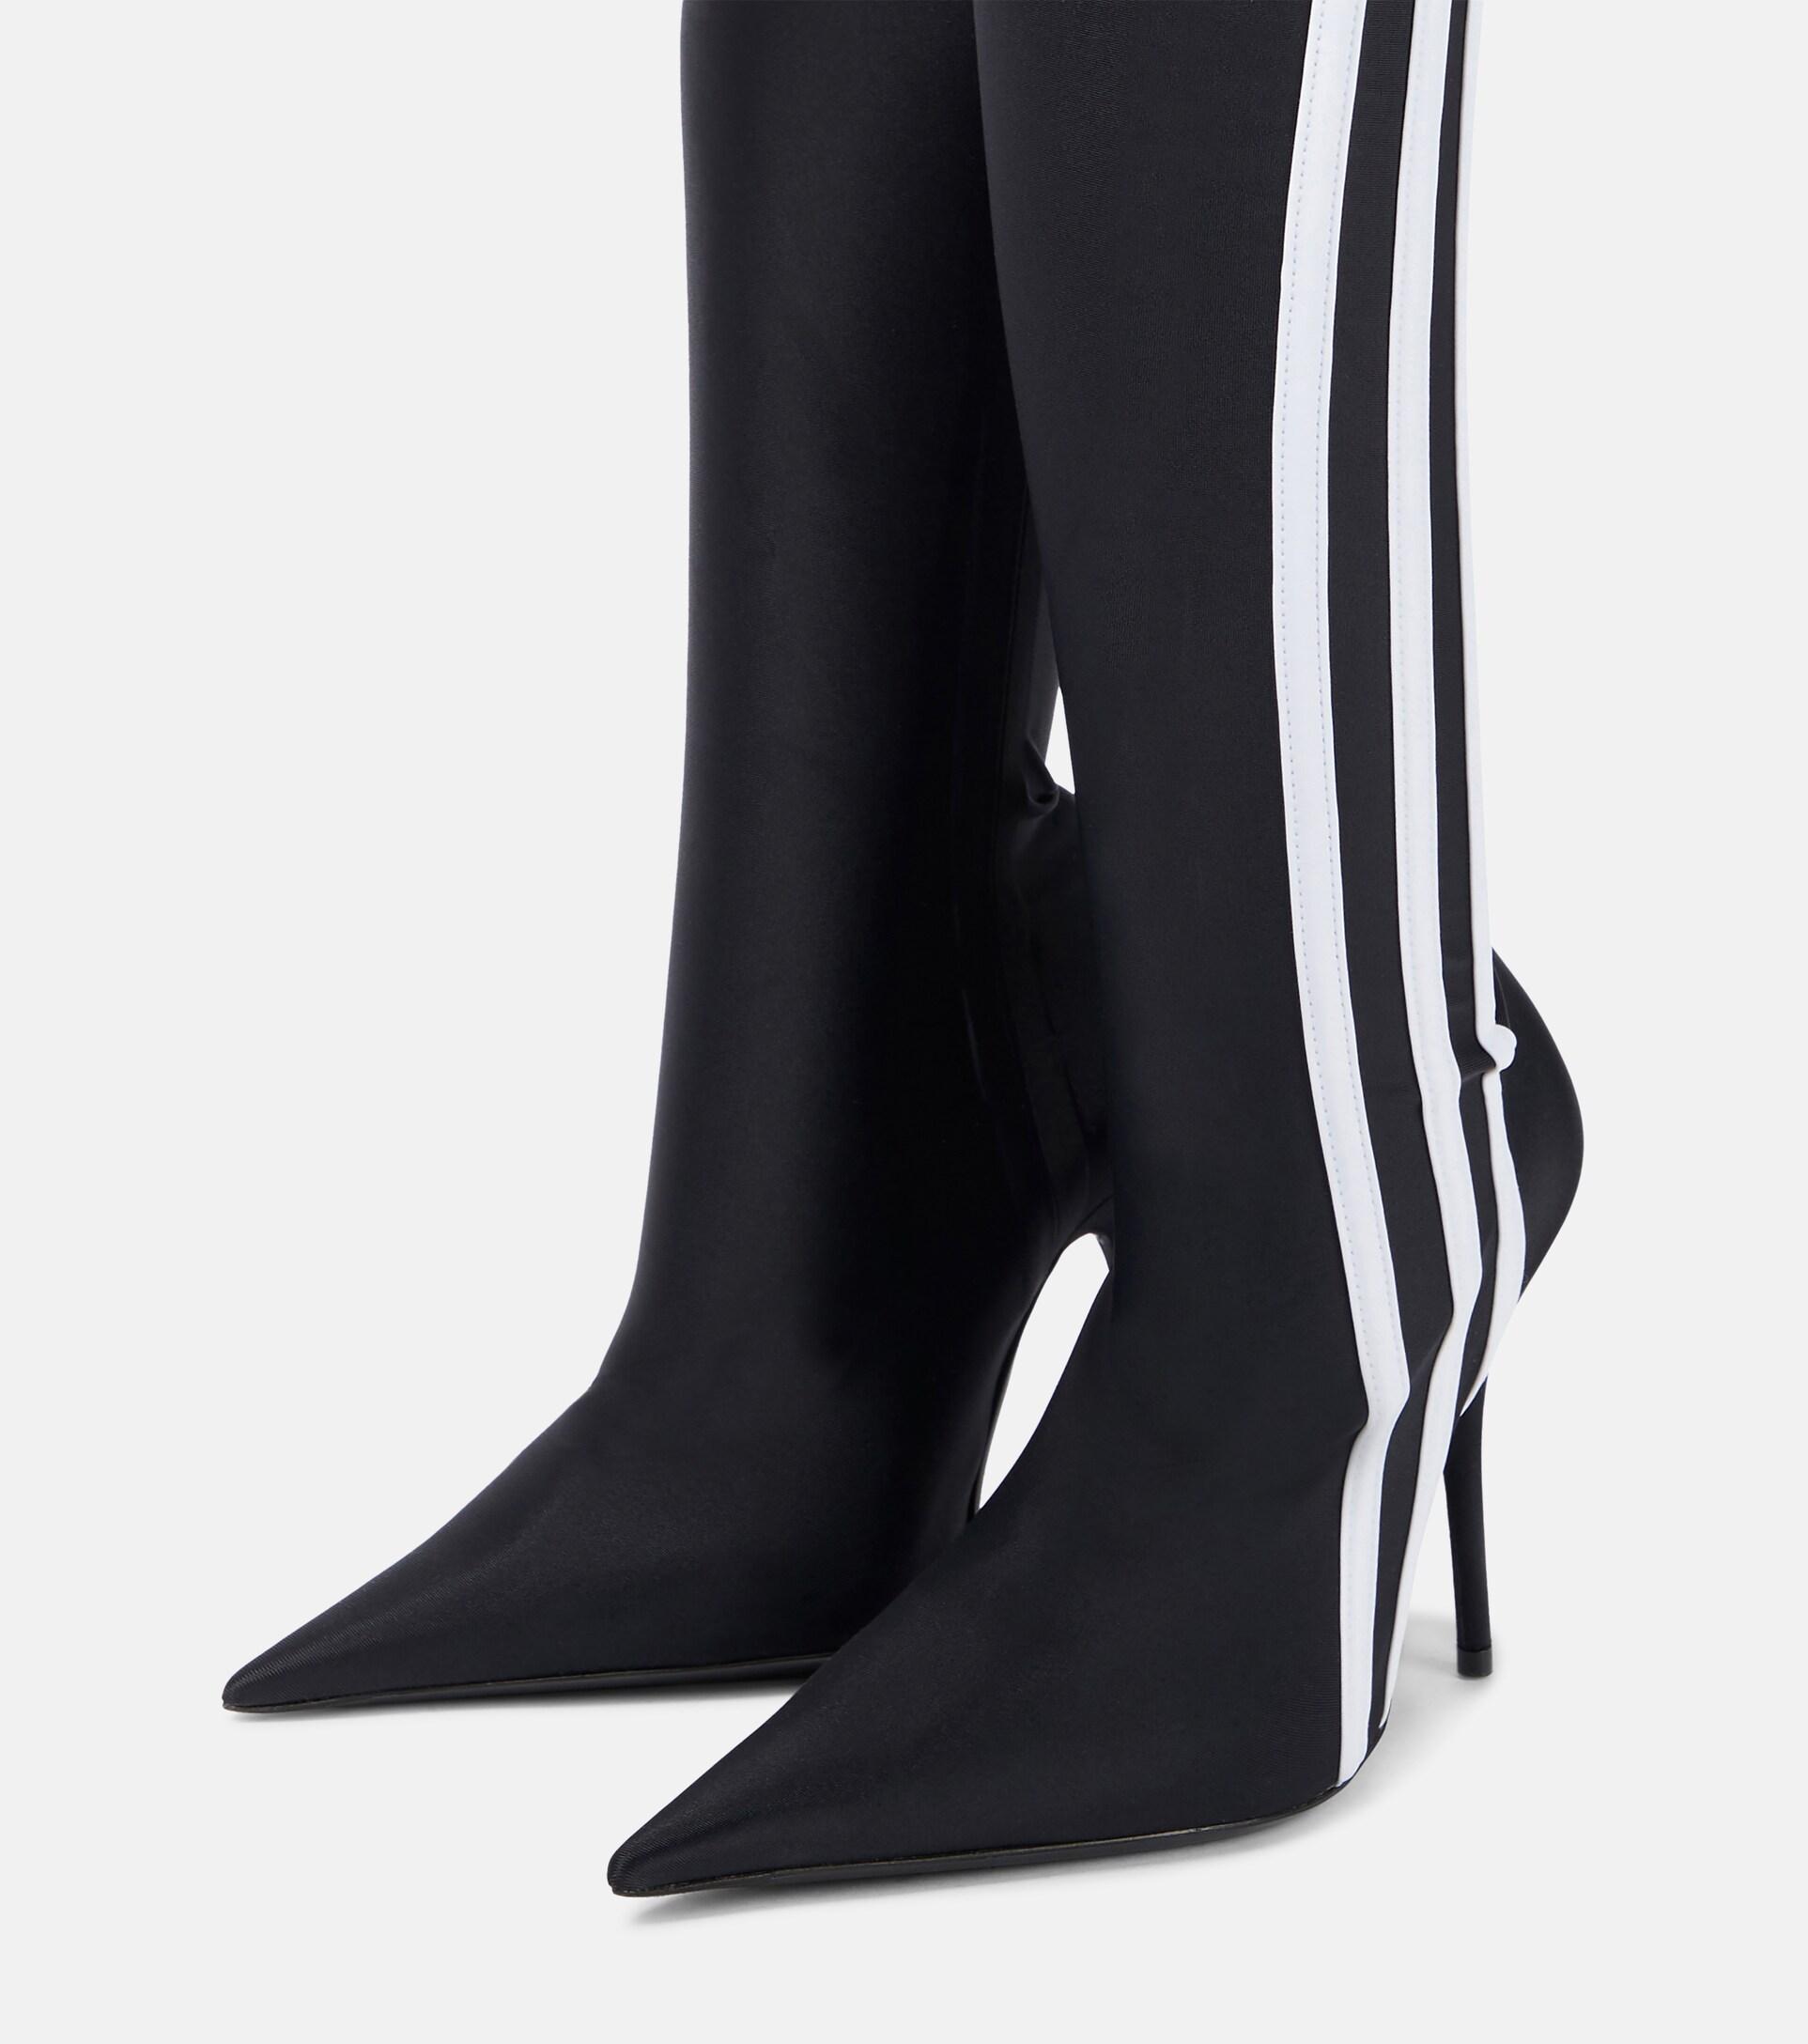 Balenciaga X Adidas Knife Over-the-knee Boots in Black | Lyst